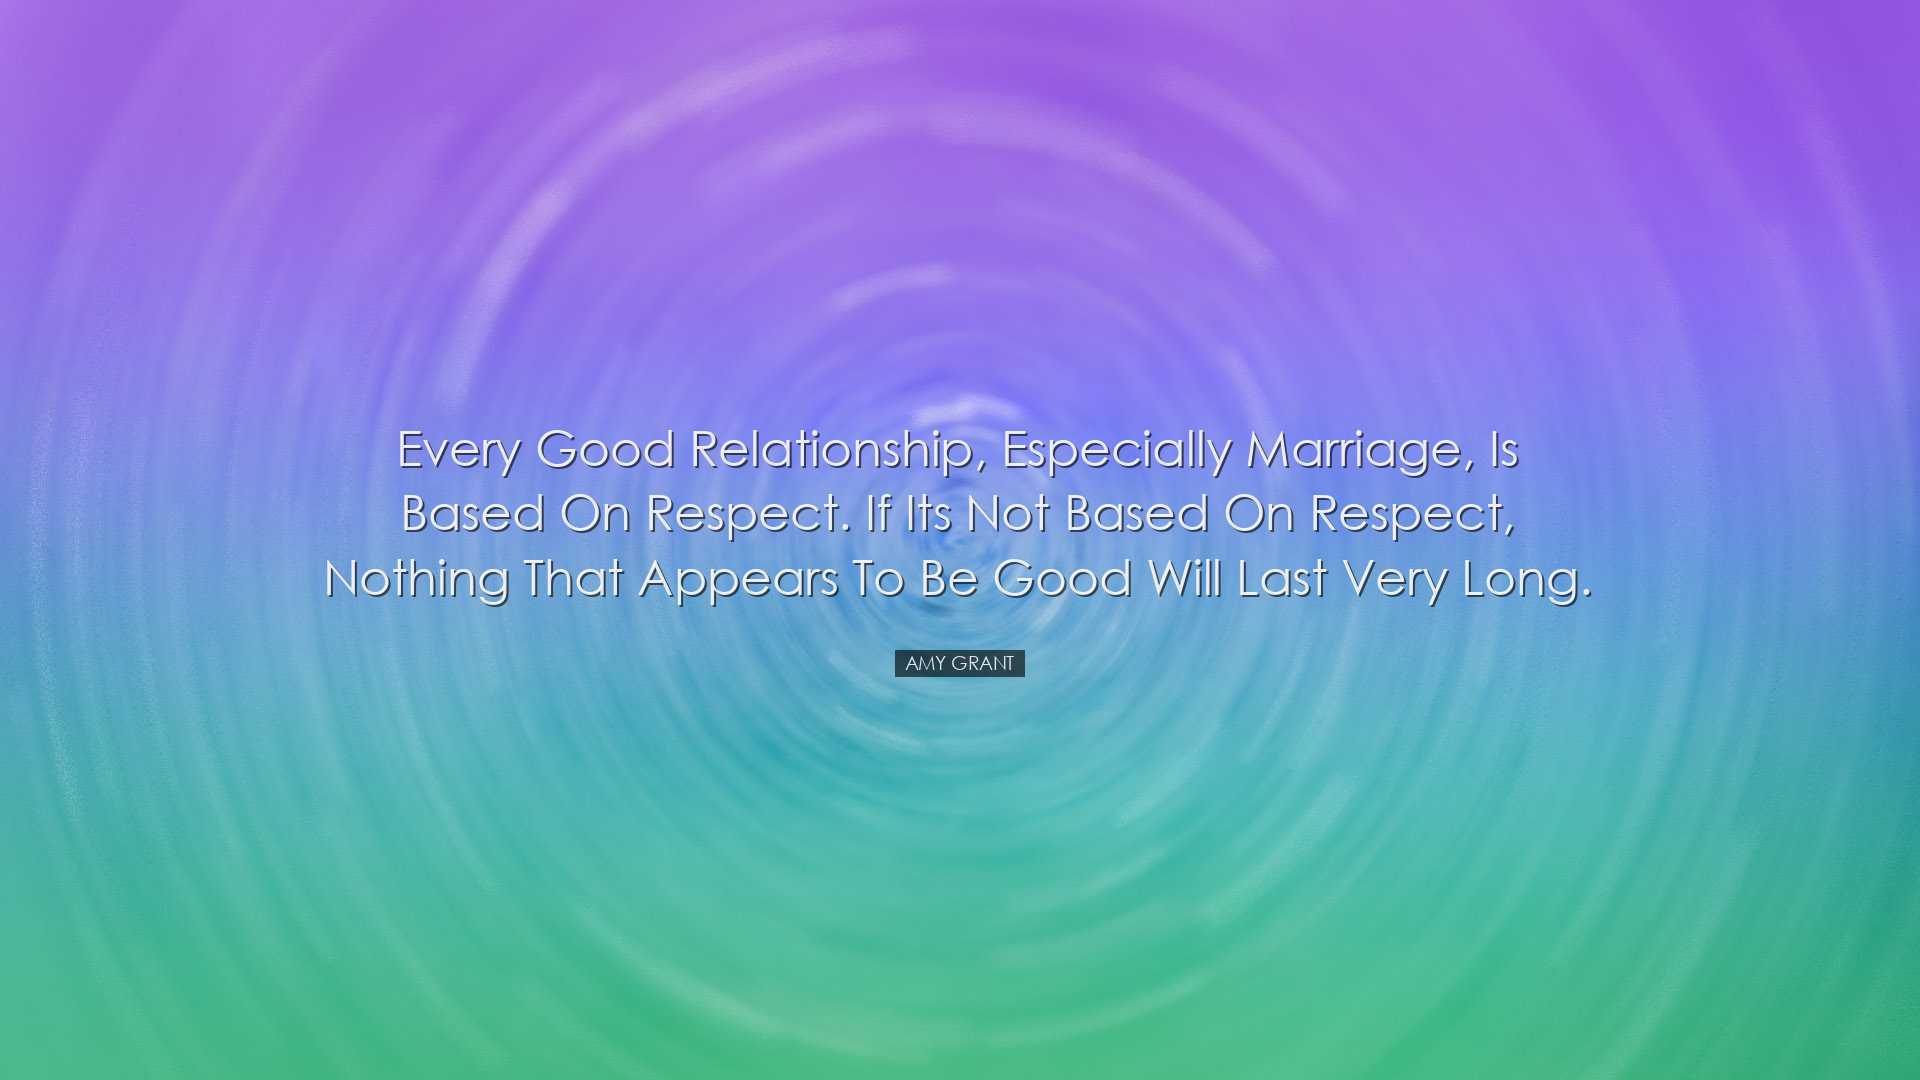 Every good relationship, especially marriage, is based on respect.